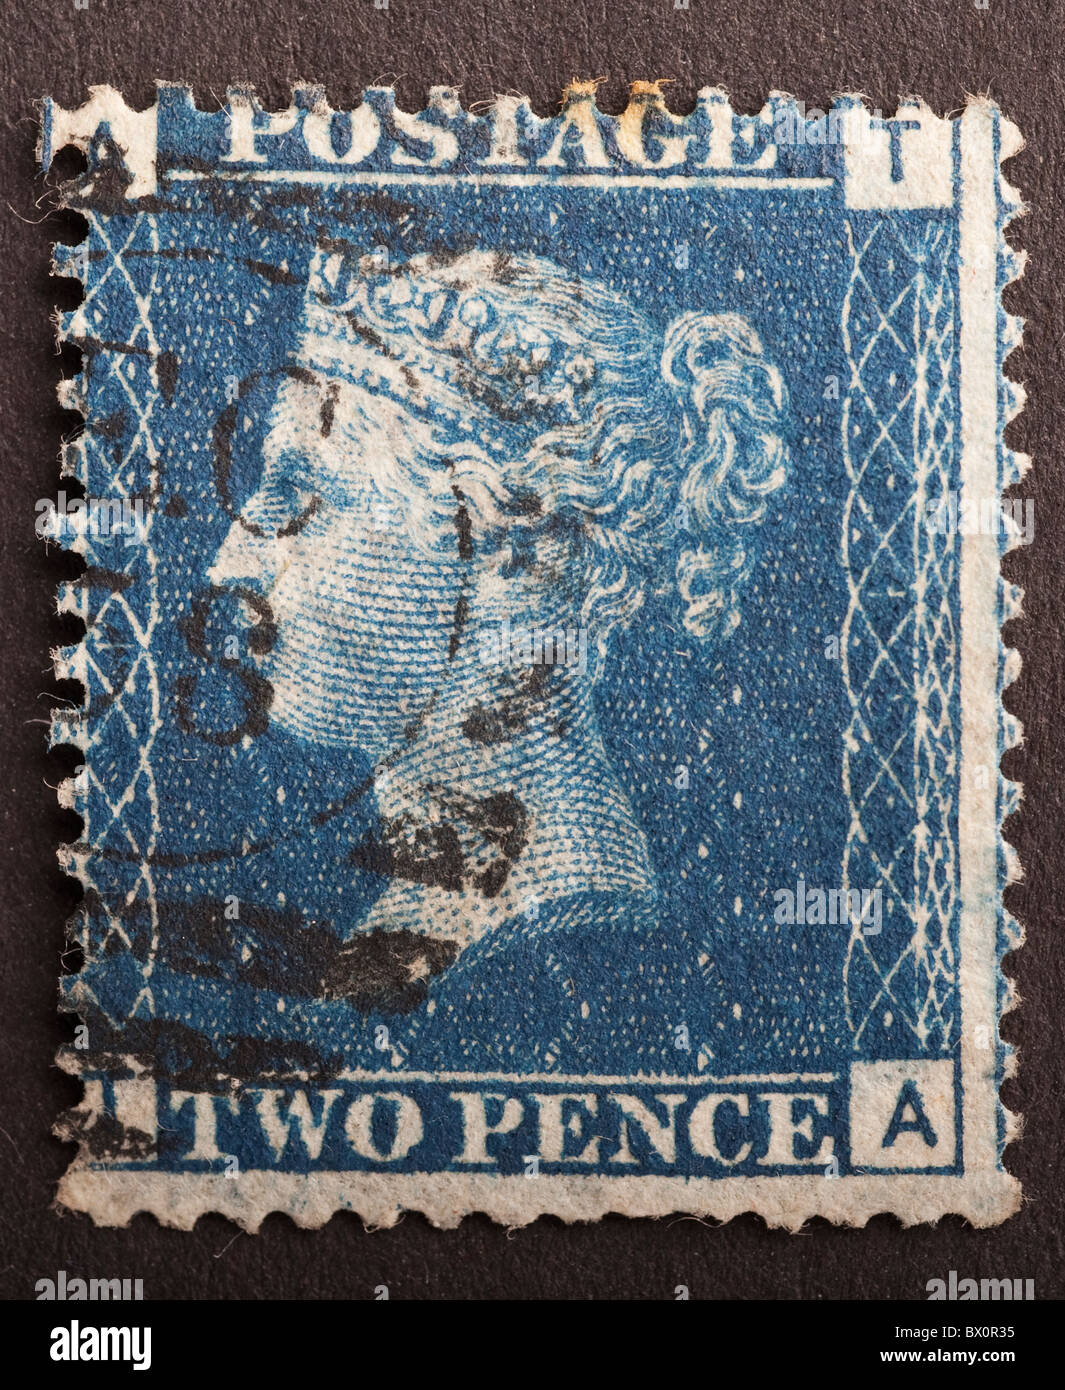 British Postage Stamp, Two Pence Blue, Corner Letters A, T Stock Photo